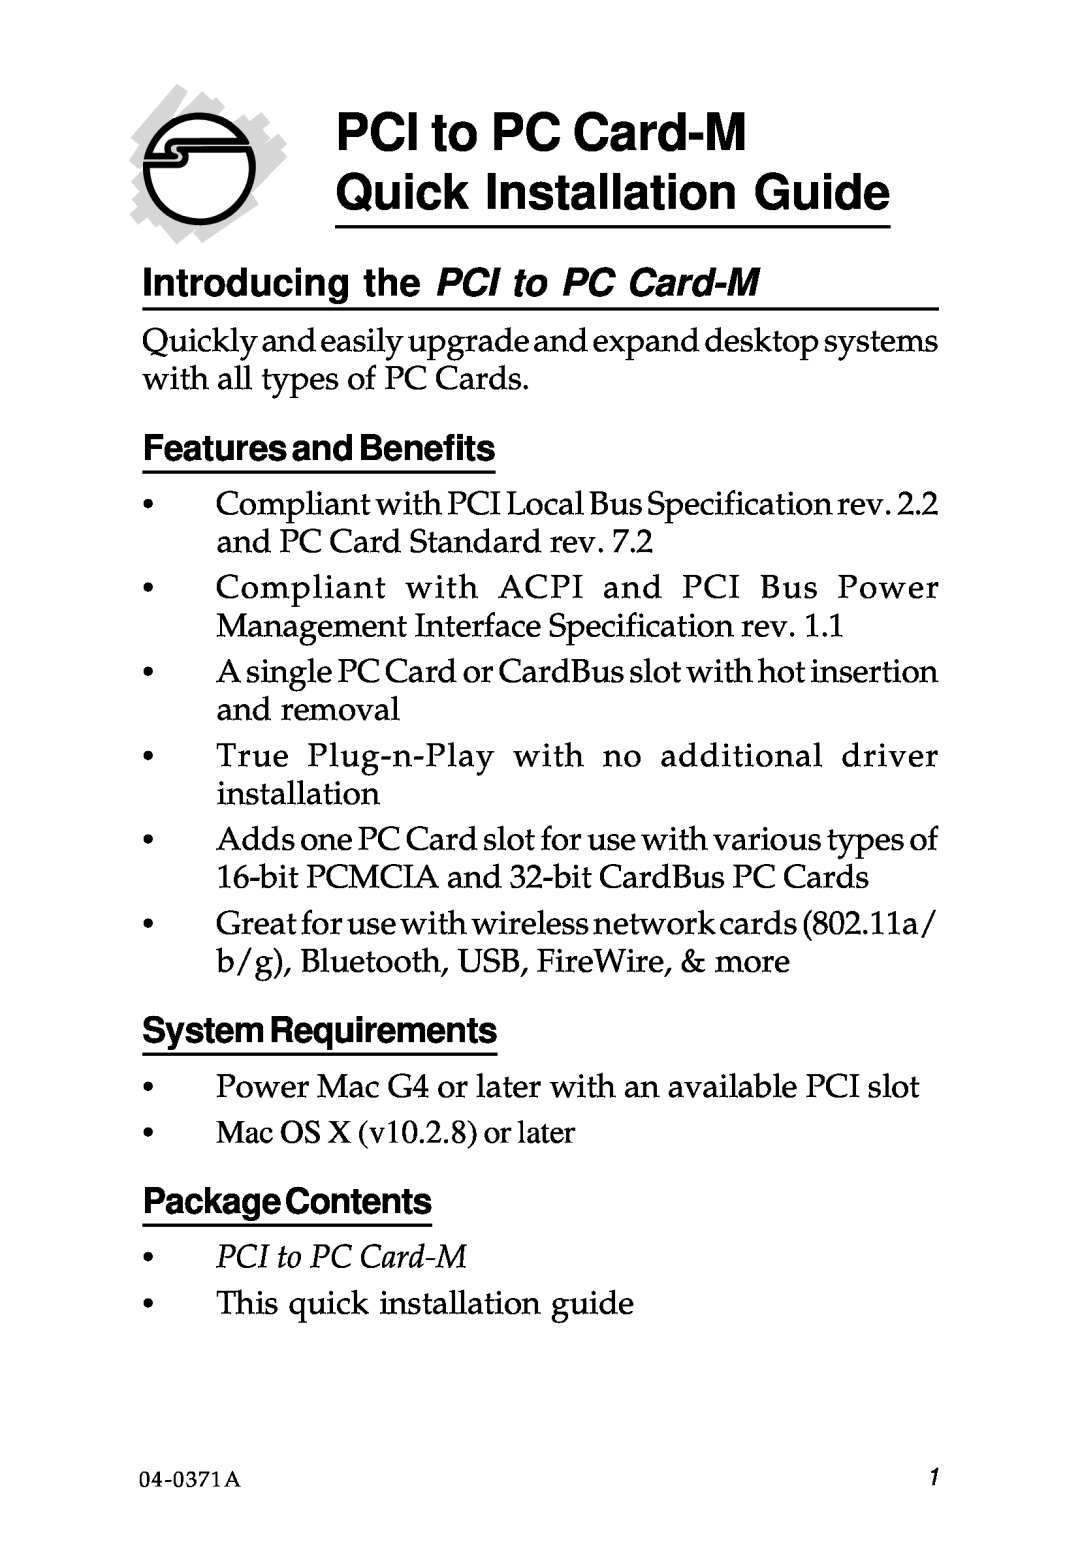 SIIG Network Card manual Introducing the PCI to PC Card-M, Features and Benefits, System Requirements, Package Contents 